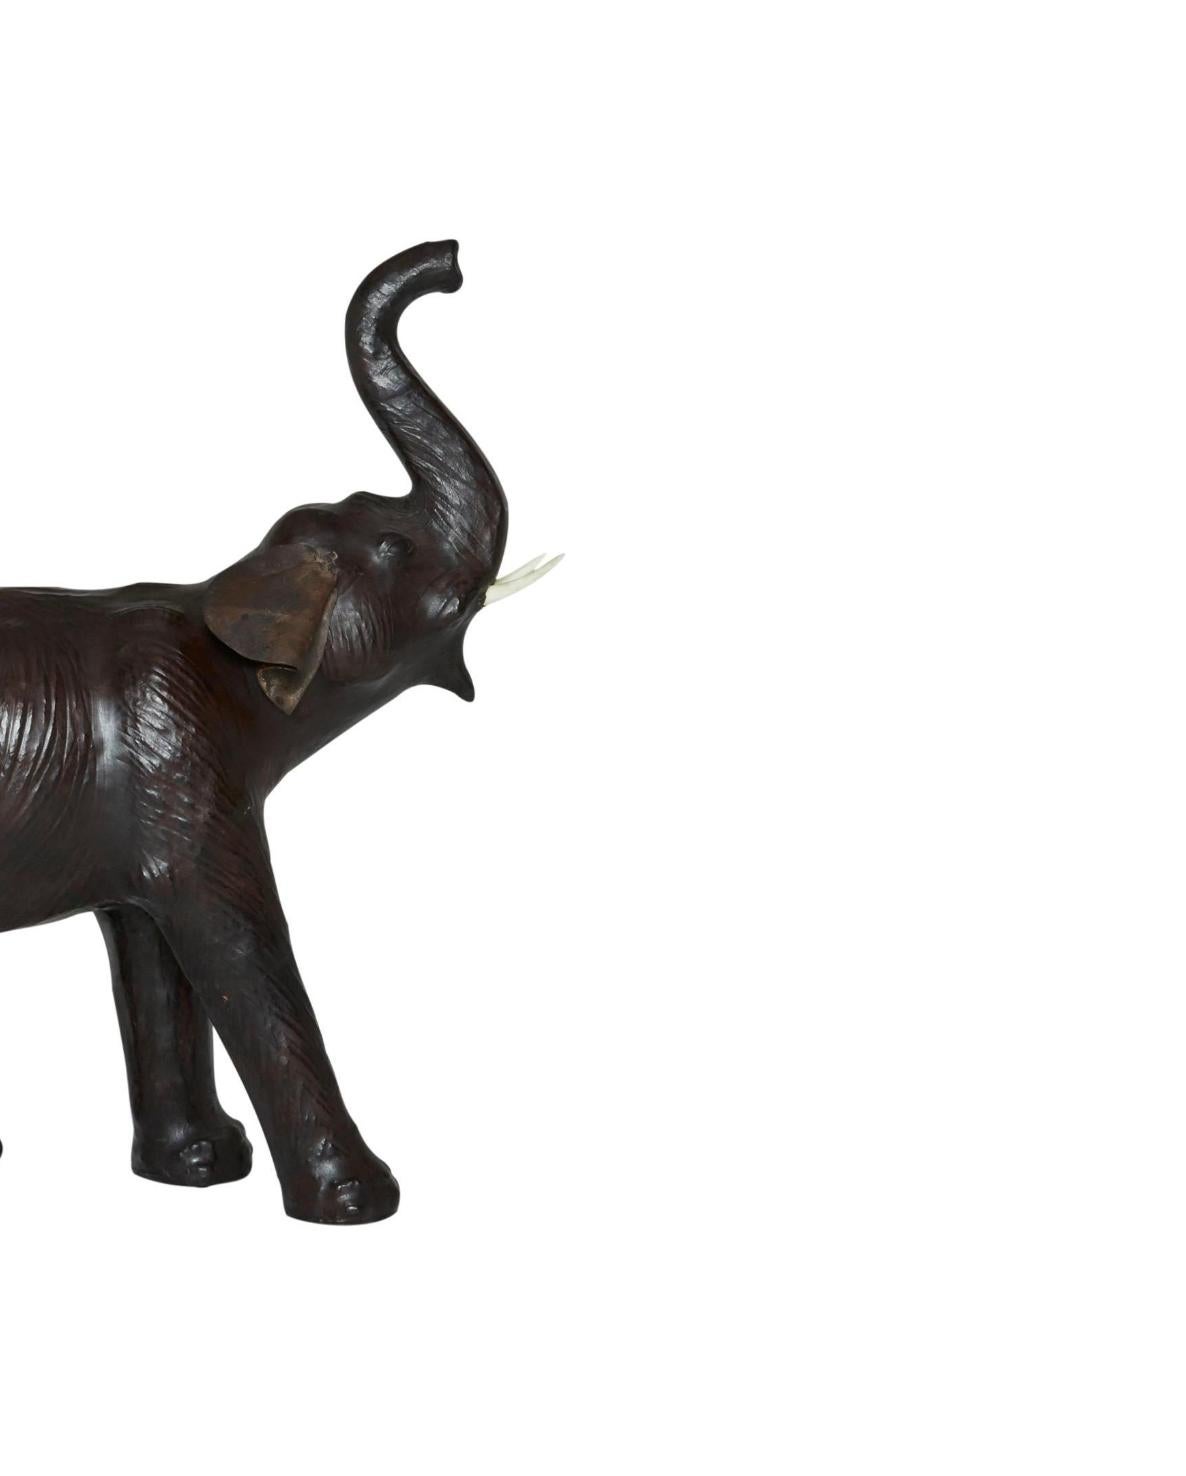 This leather elephant statue adds an eclectic accent to any vignette. A great addition to decor of African or Asian influences, as well as modern, Bohemian, and Industrial spaces. Animal art and decor is timeless, an endlessly relevant style.